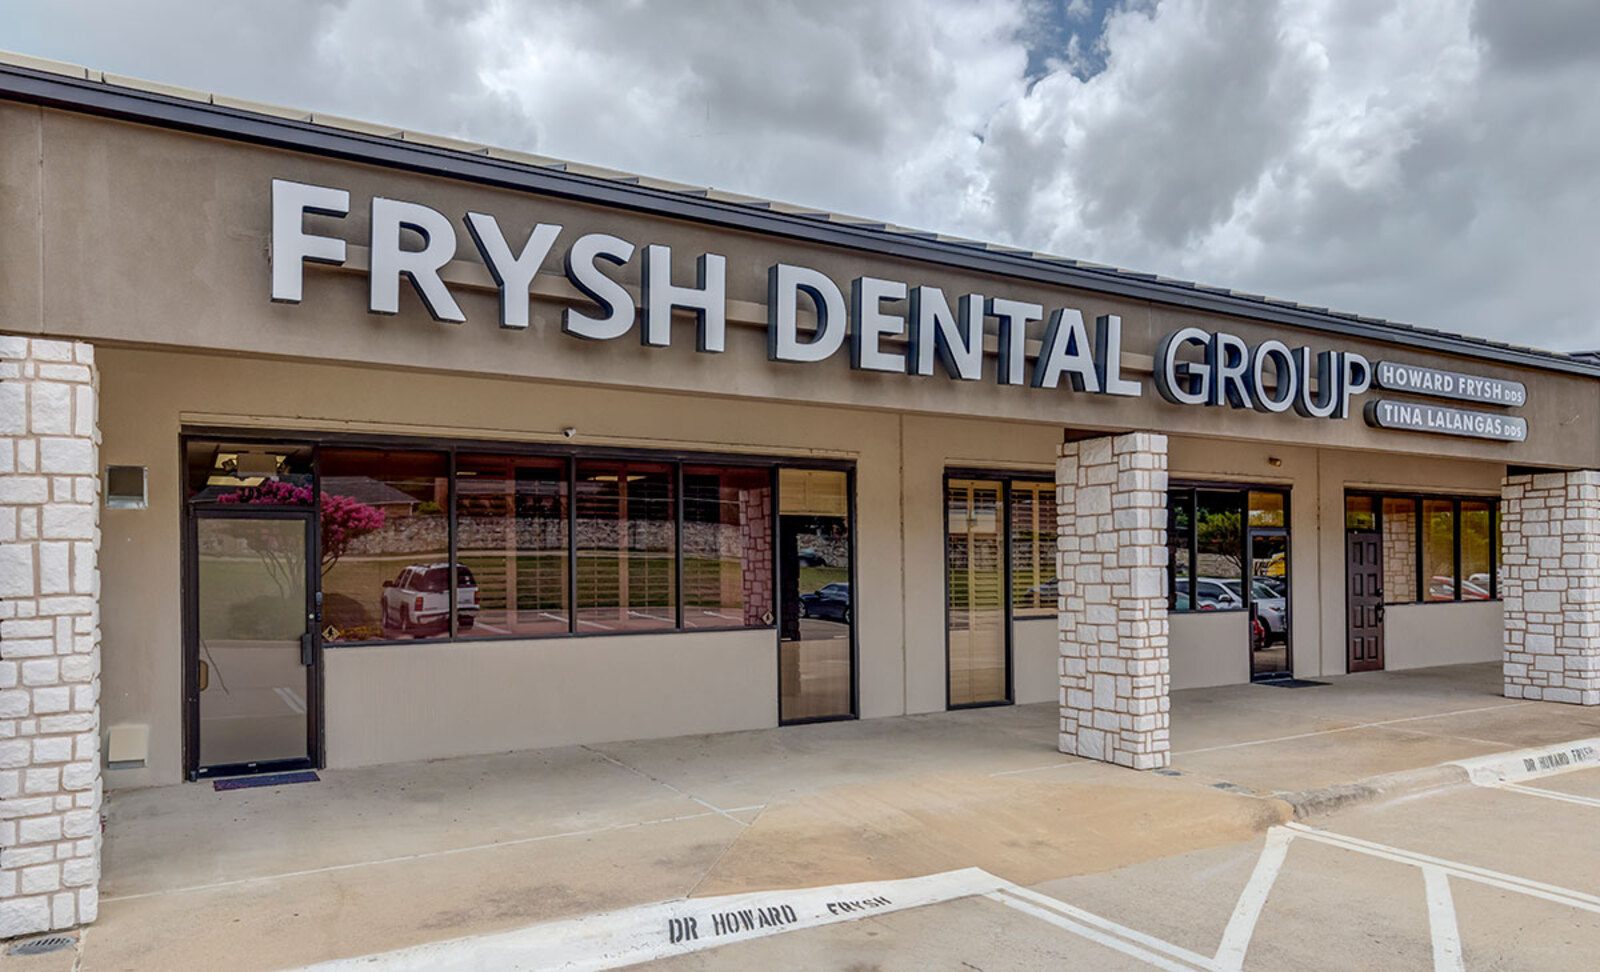 Welcome to Frysh Dental Group, conveniently located on Preston Road in North Dallas